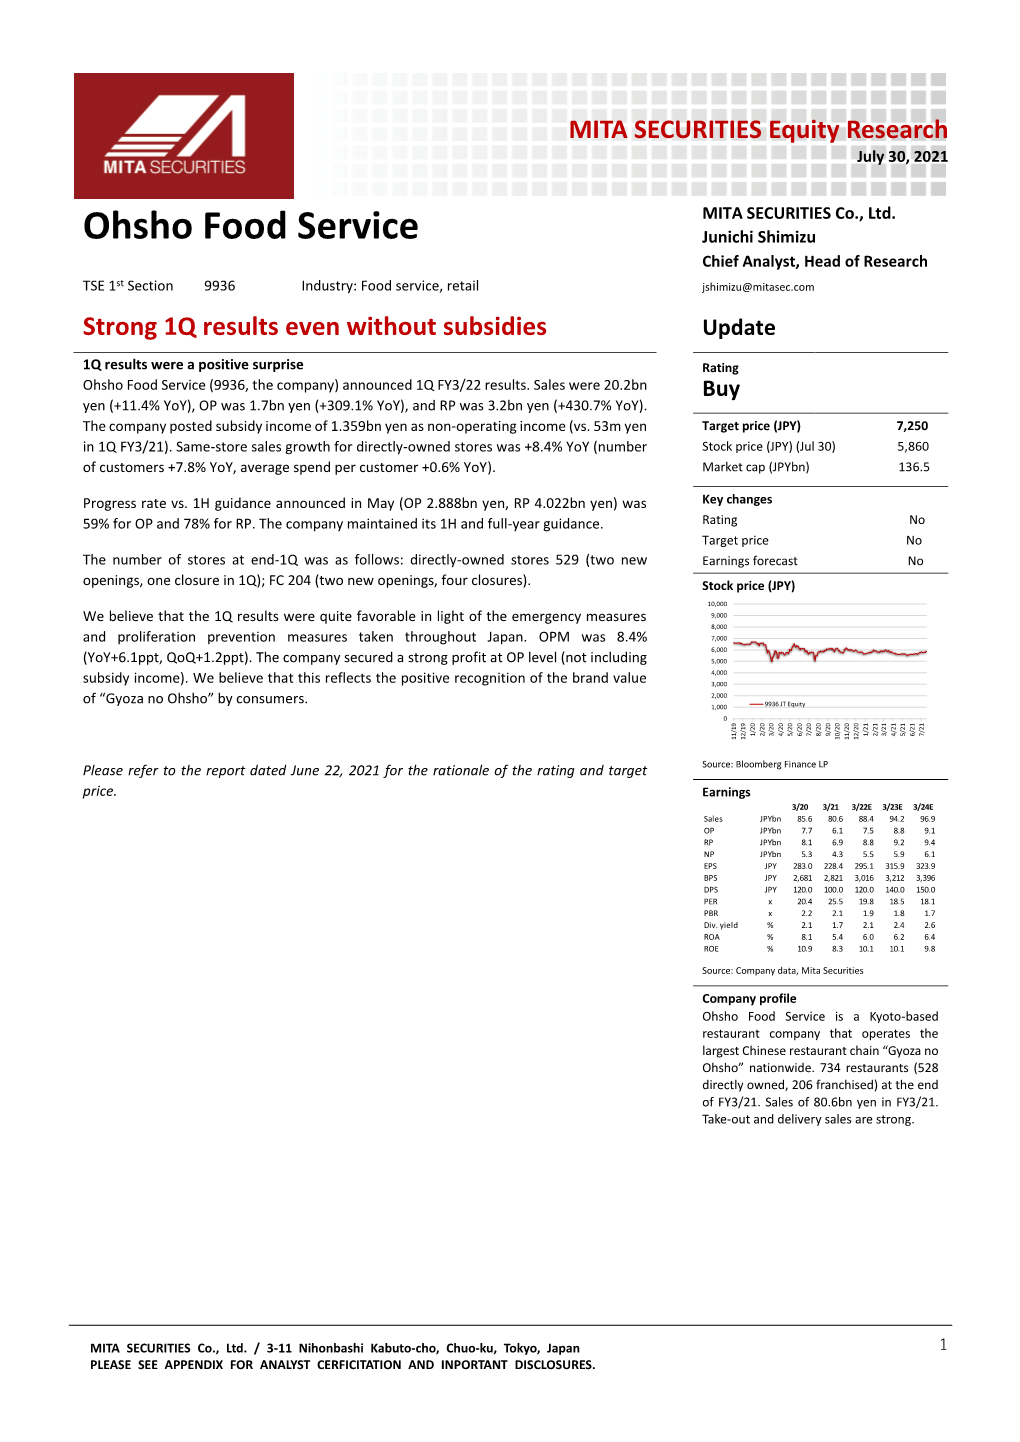 Ohsho Food Service (9936): Strong 1Q Results Even Without Subsidies